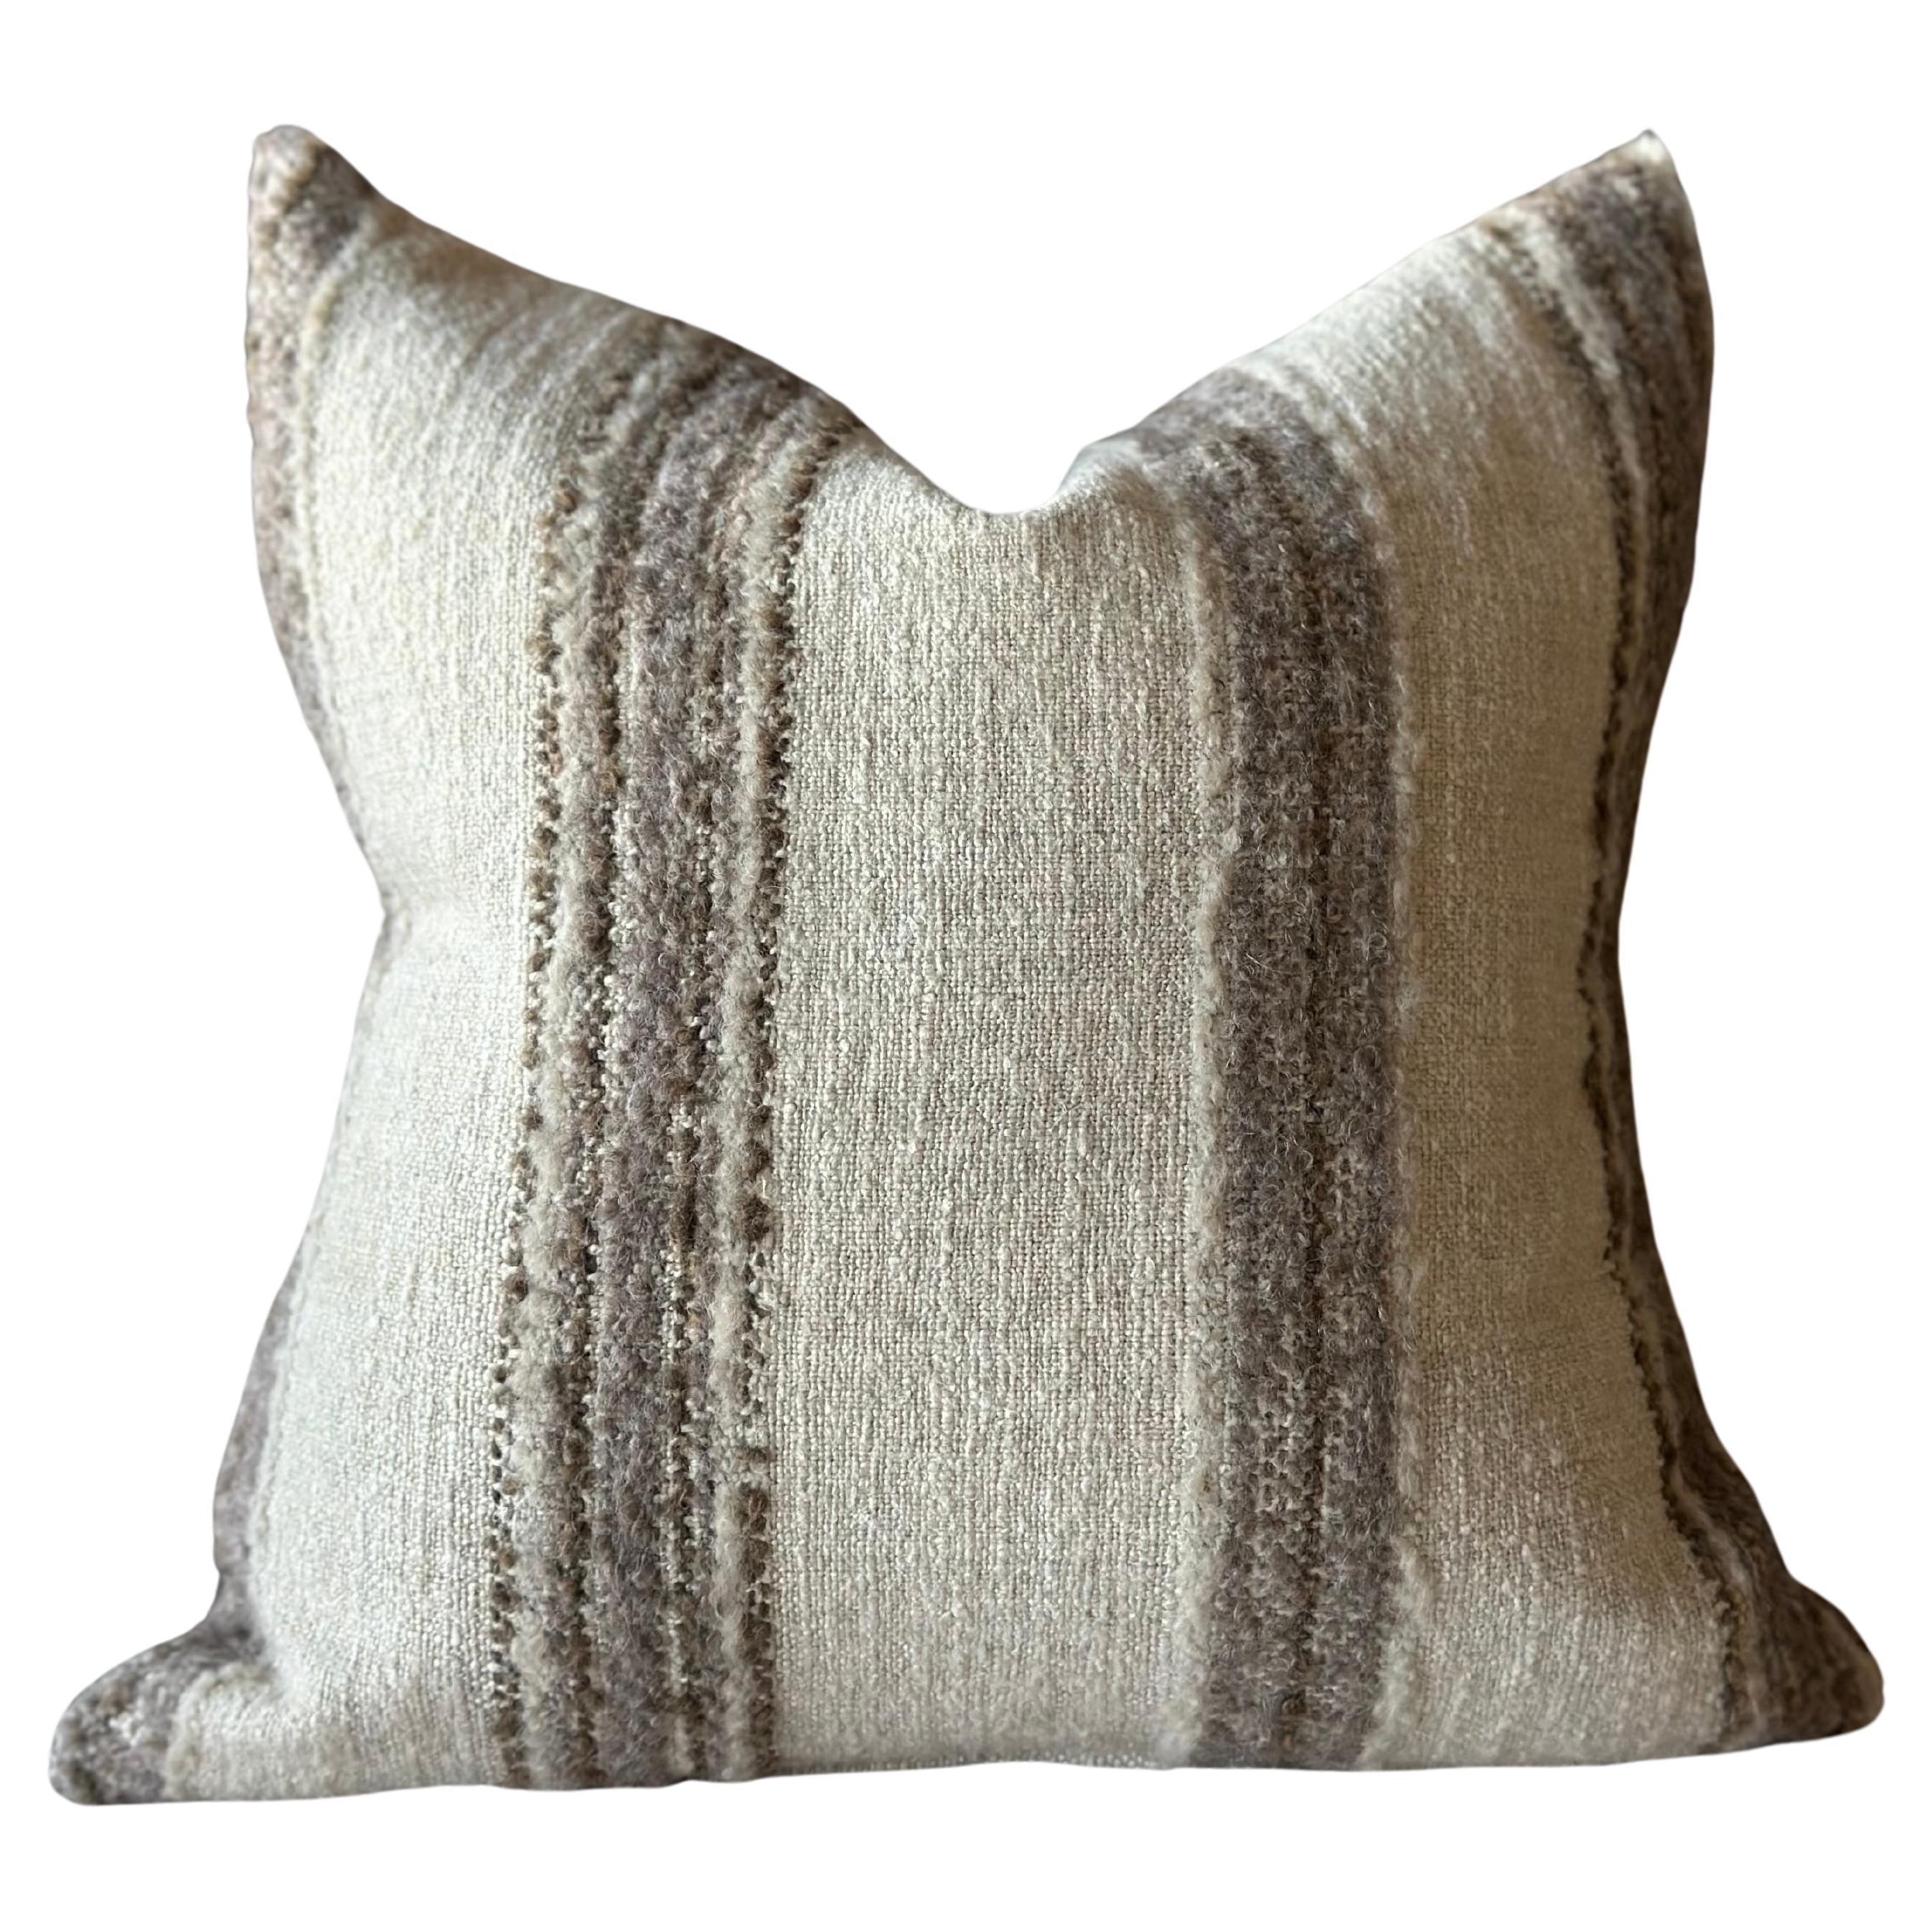 Woven Belgian Linen and Wool Stripe Accent Pillow with Down Insert